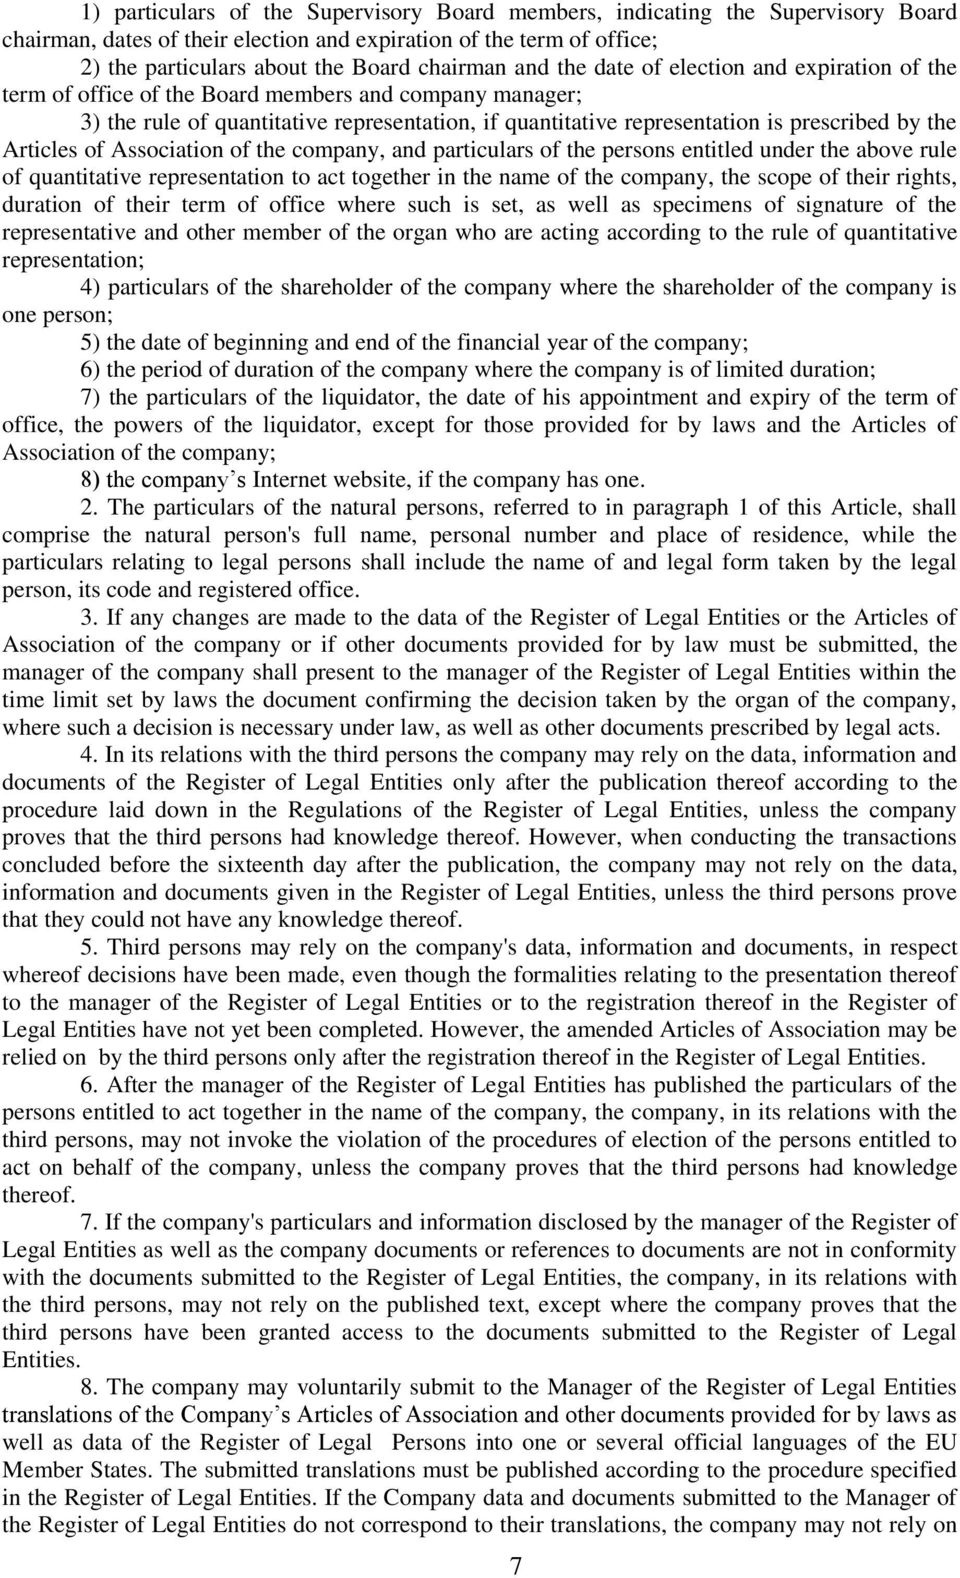 Articles of Association of the company, and particulars of the persons entitled under the above rule of quantitative representation to act together in the name of the company, the scope of their